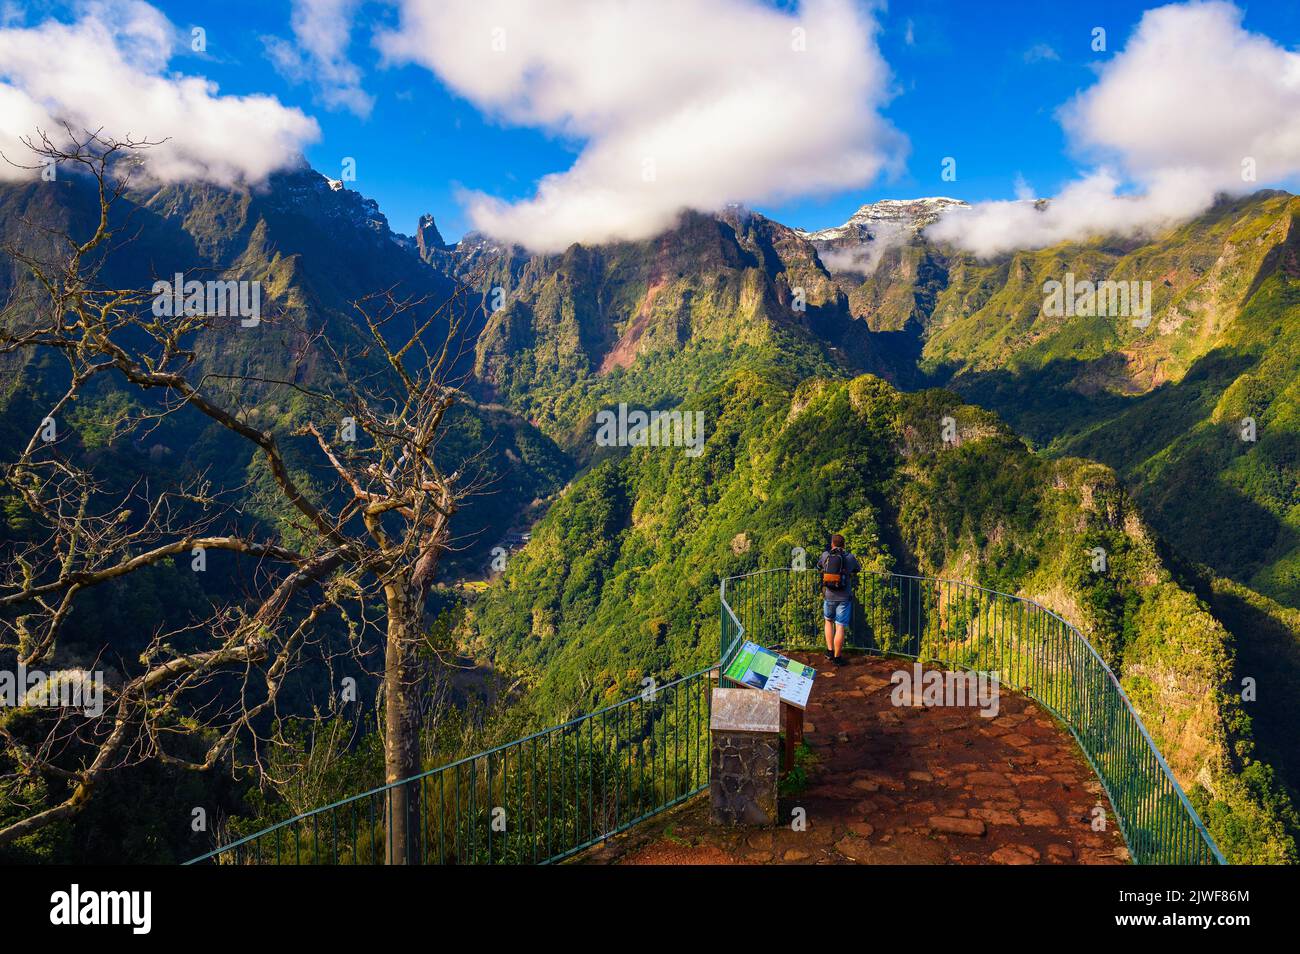 Tourist at the Balcoes viewpoint on Madeira Island, Portugal Stock Photo